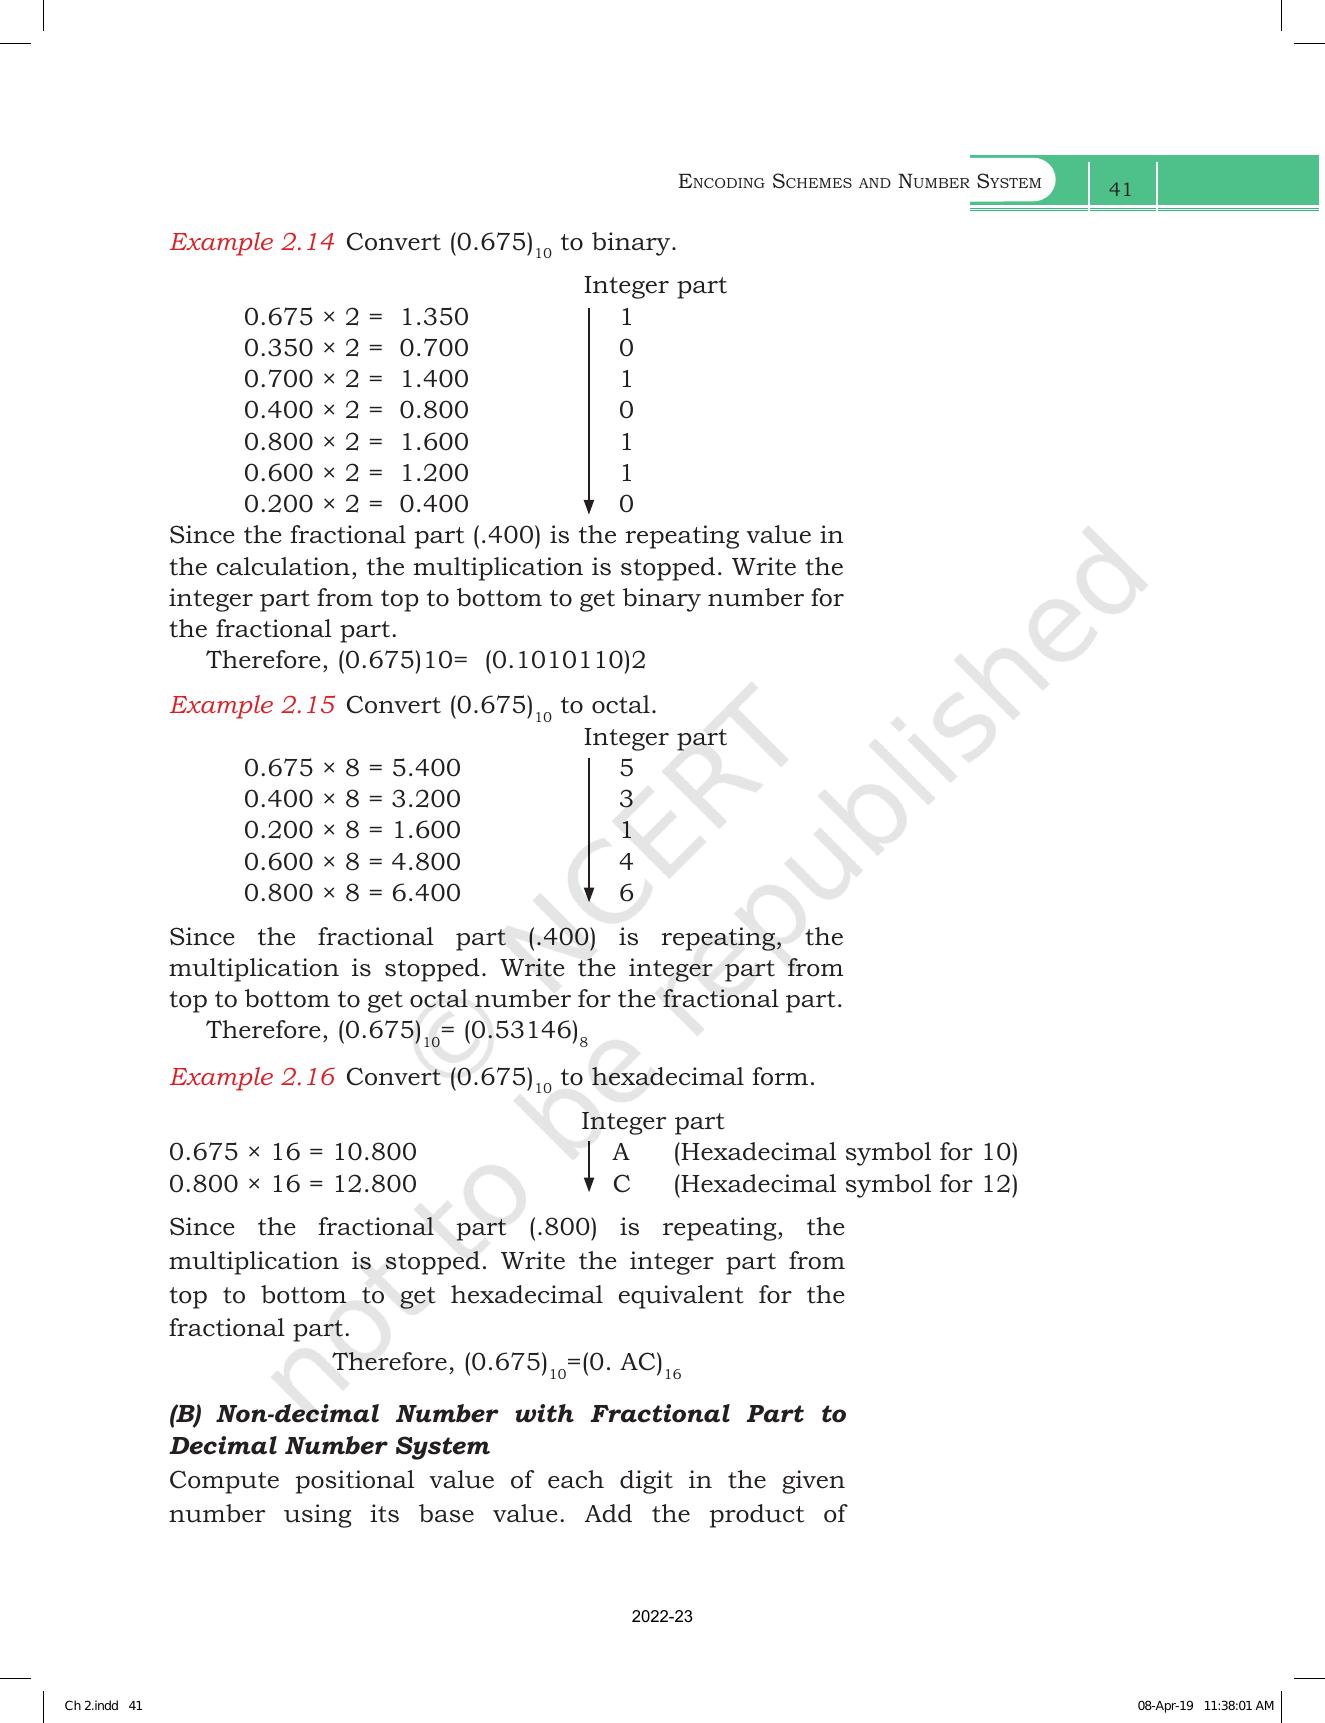 NCERT Book for Class 11 Computer Science Chapter 2 Encoding Schemes and Number System - Page 15